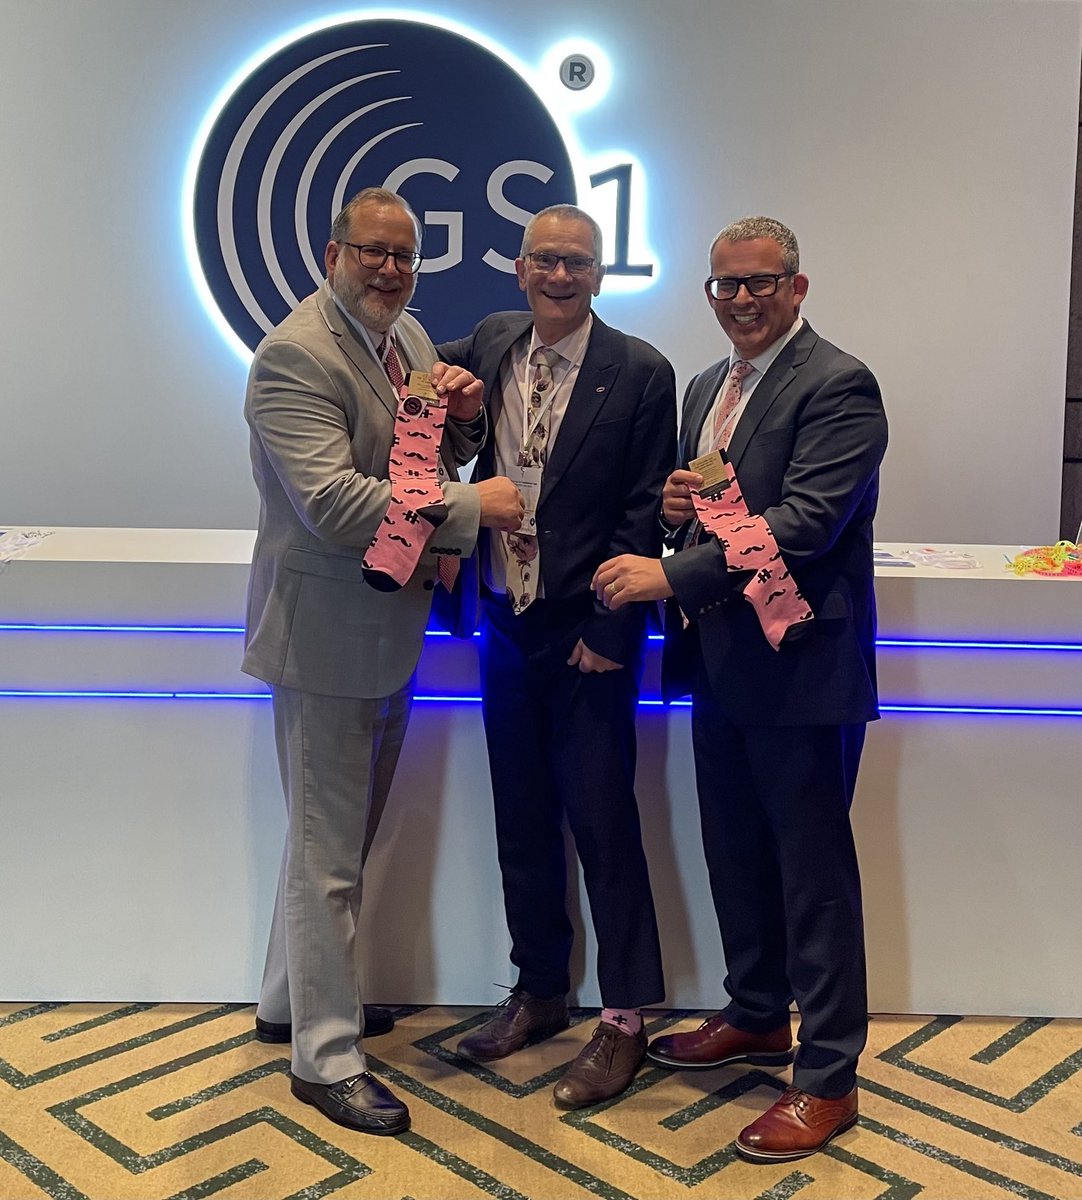 Excited to be at ⁦@GS1Healthcare⁩ conference in #SaoPaolo and joined by two ⁦@gs1uk_hc⁩ Advisory Group members who spoke about their #GS1 adoption and today joined the #pinksocks UK tribe. Welcome ⁦@RaynesAndrew⁩ ⁦@stevieb68⁩ ⁦@nickisnpdx⁩